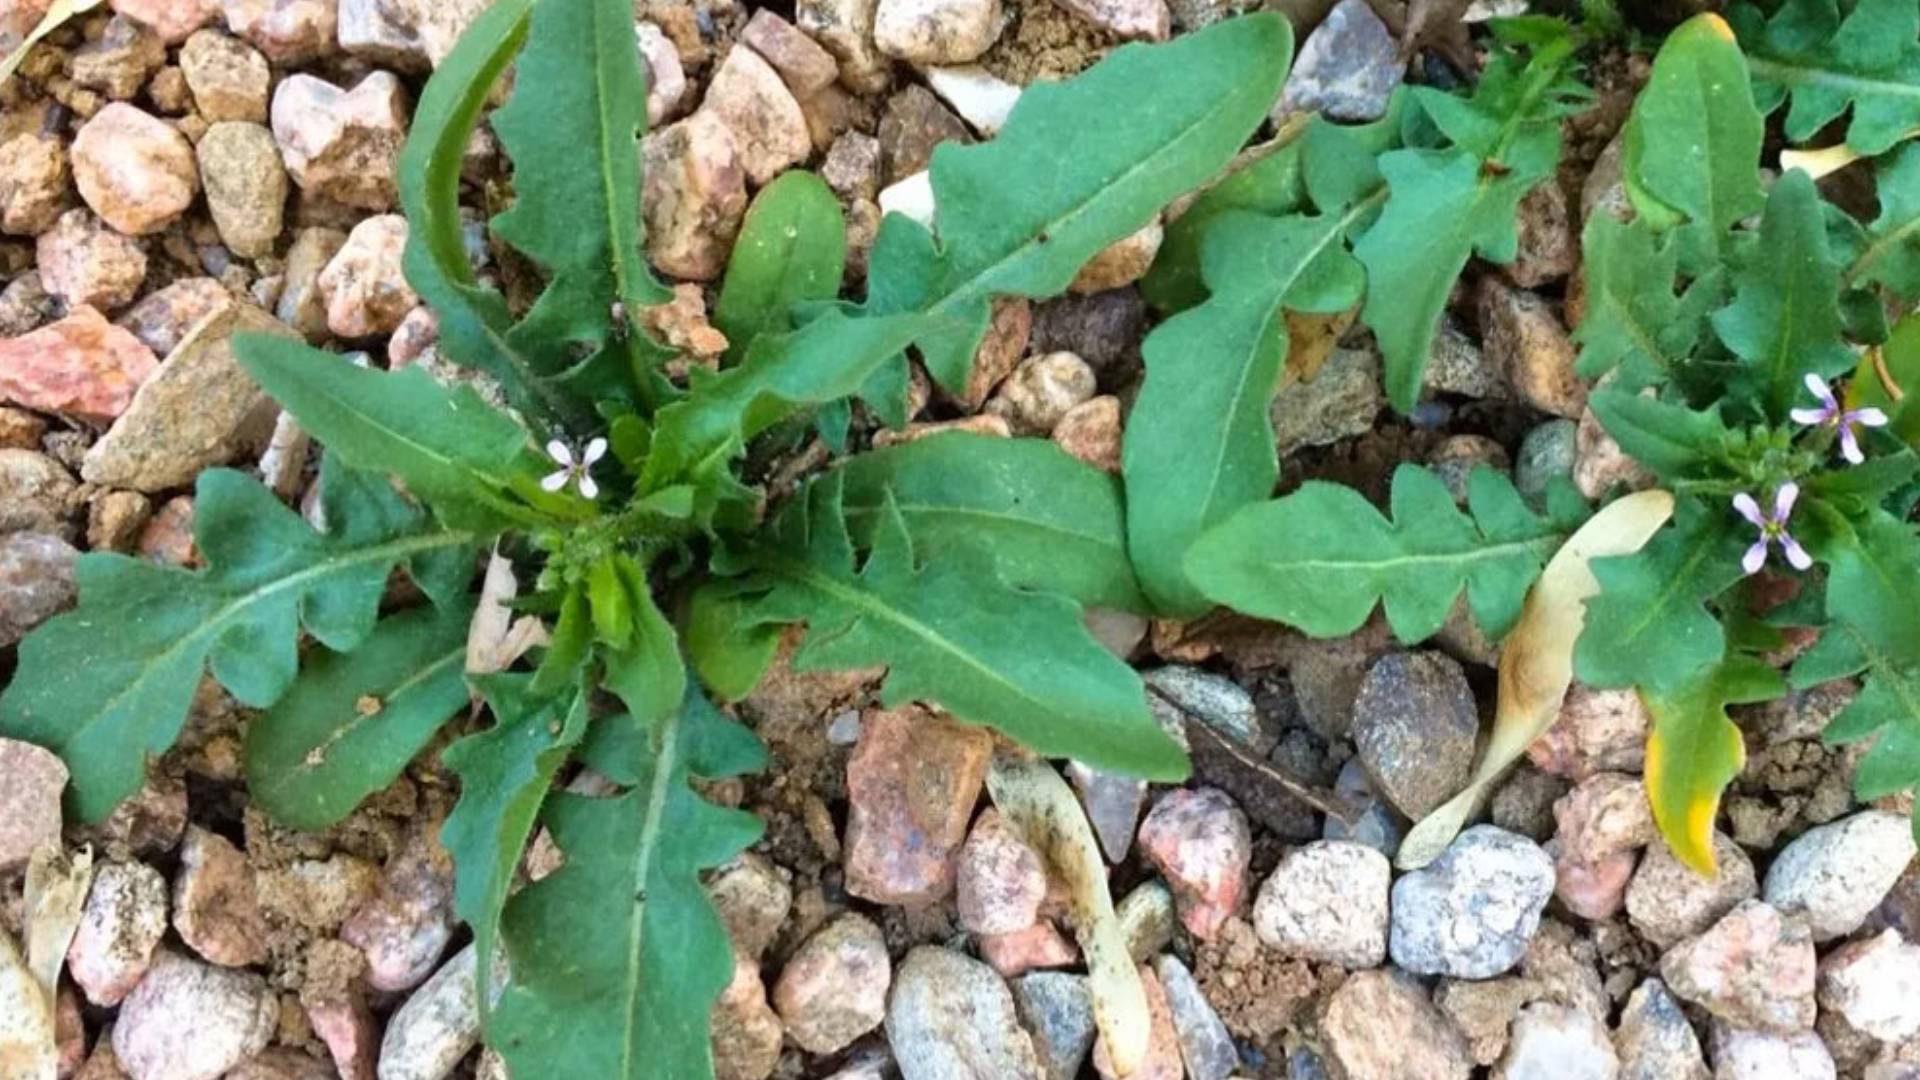 Weeds: Types, Control, and Prevention